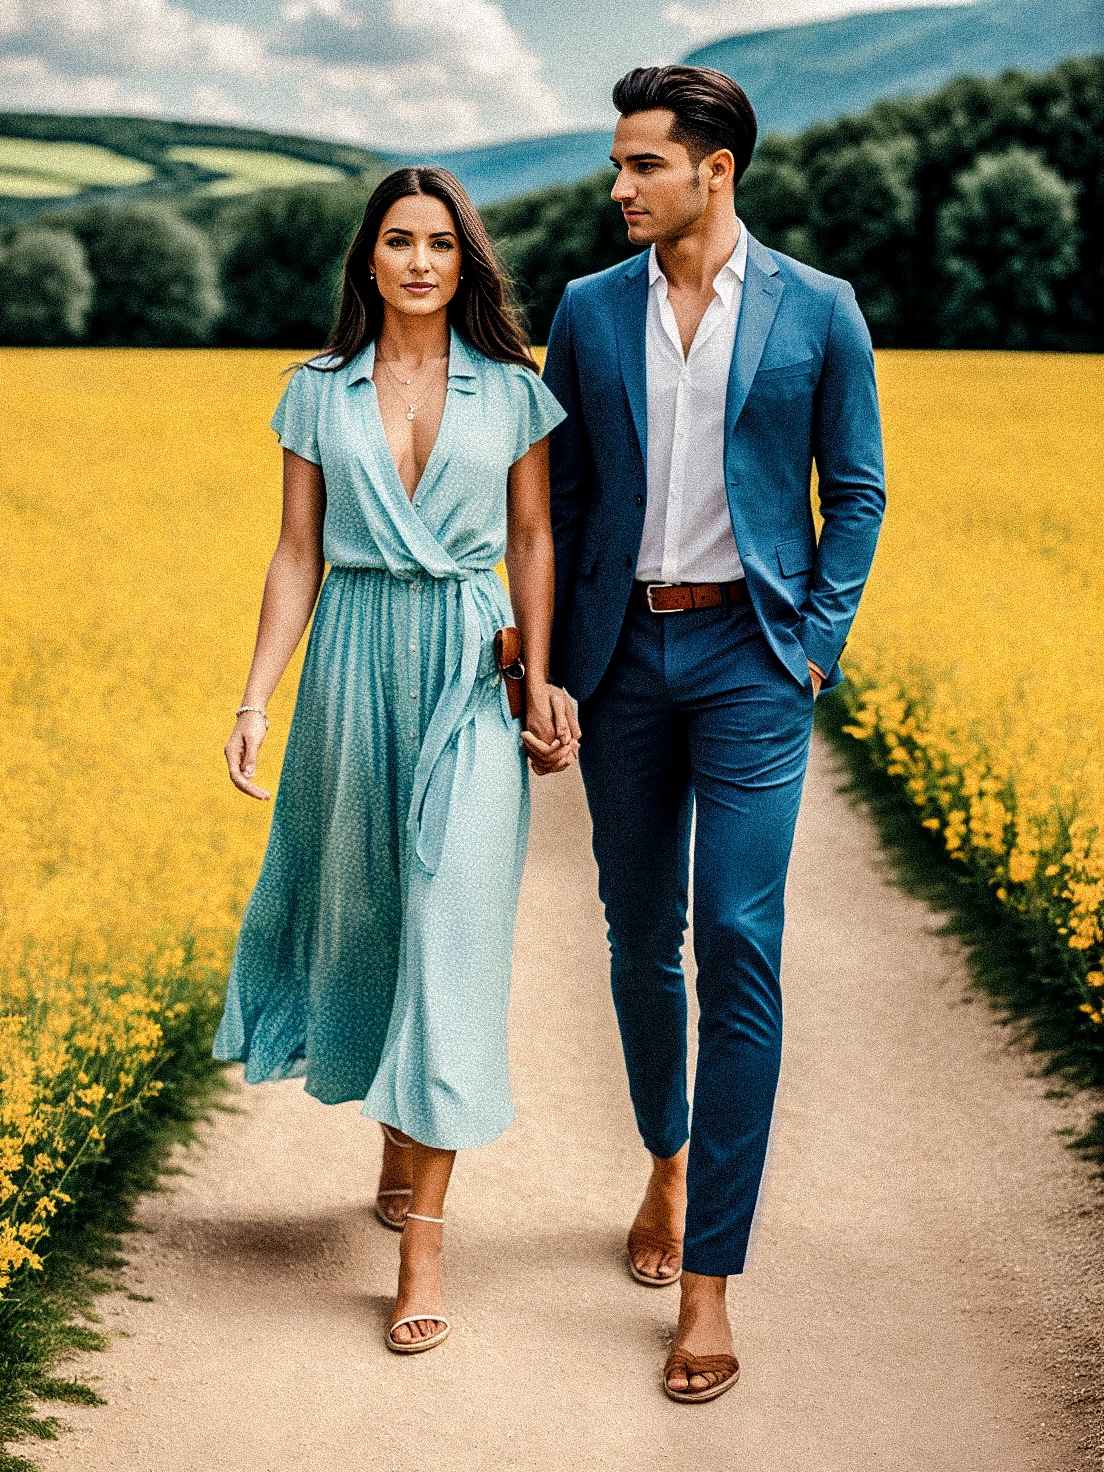 A man and a woman walk through a field of yellow flowers, dressed in elegant clothing suitable for a wedding.